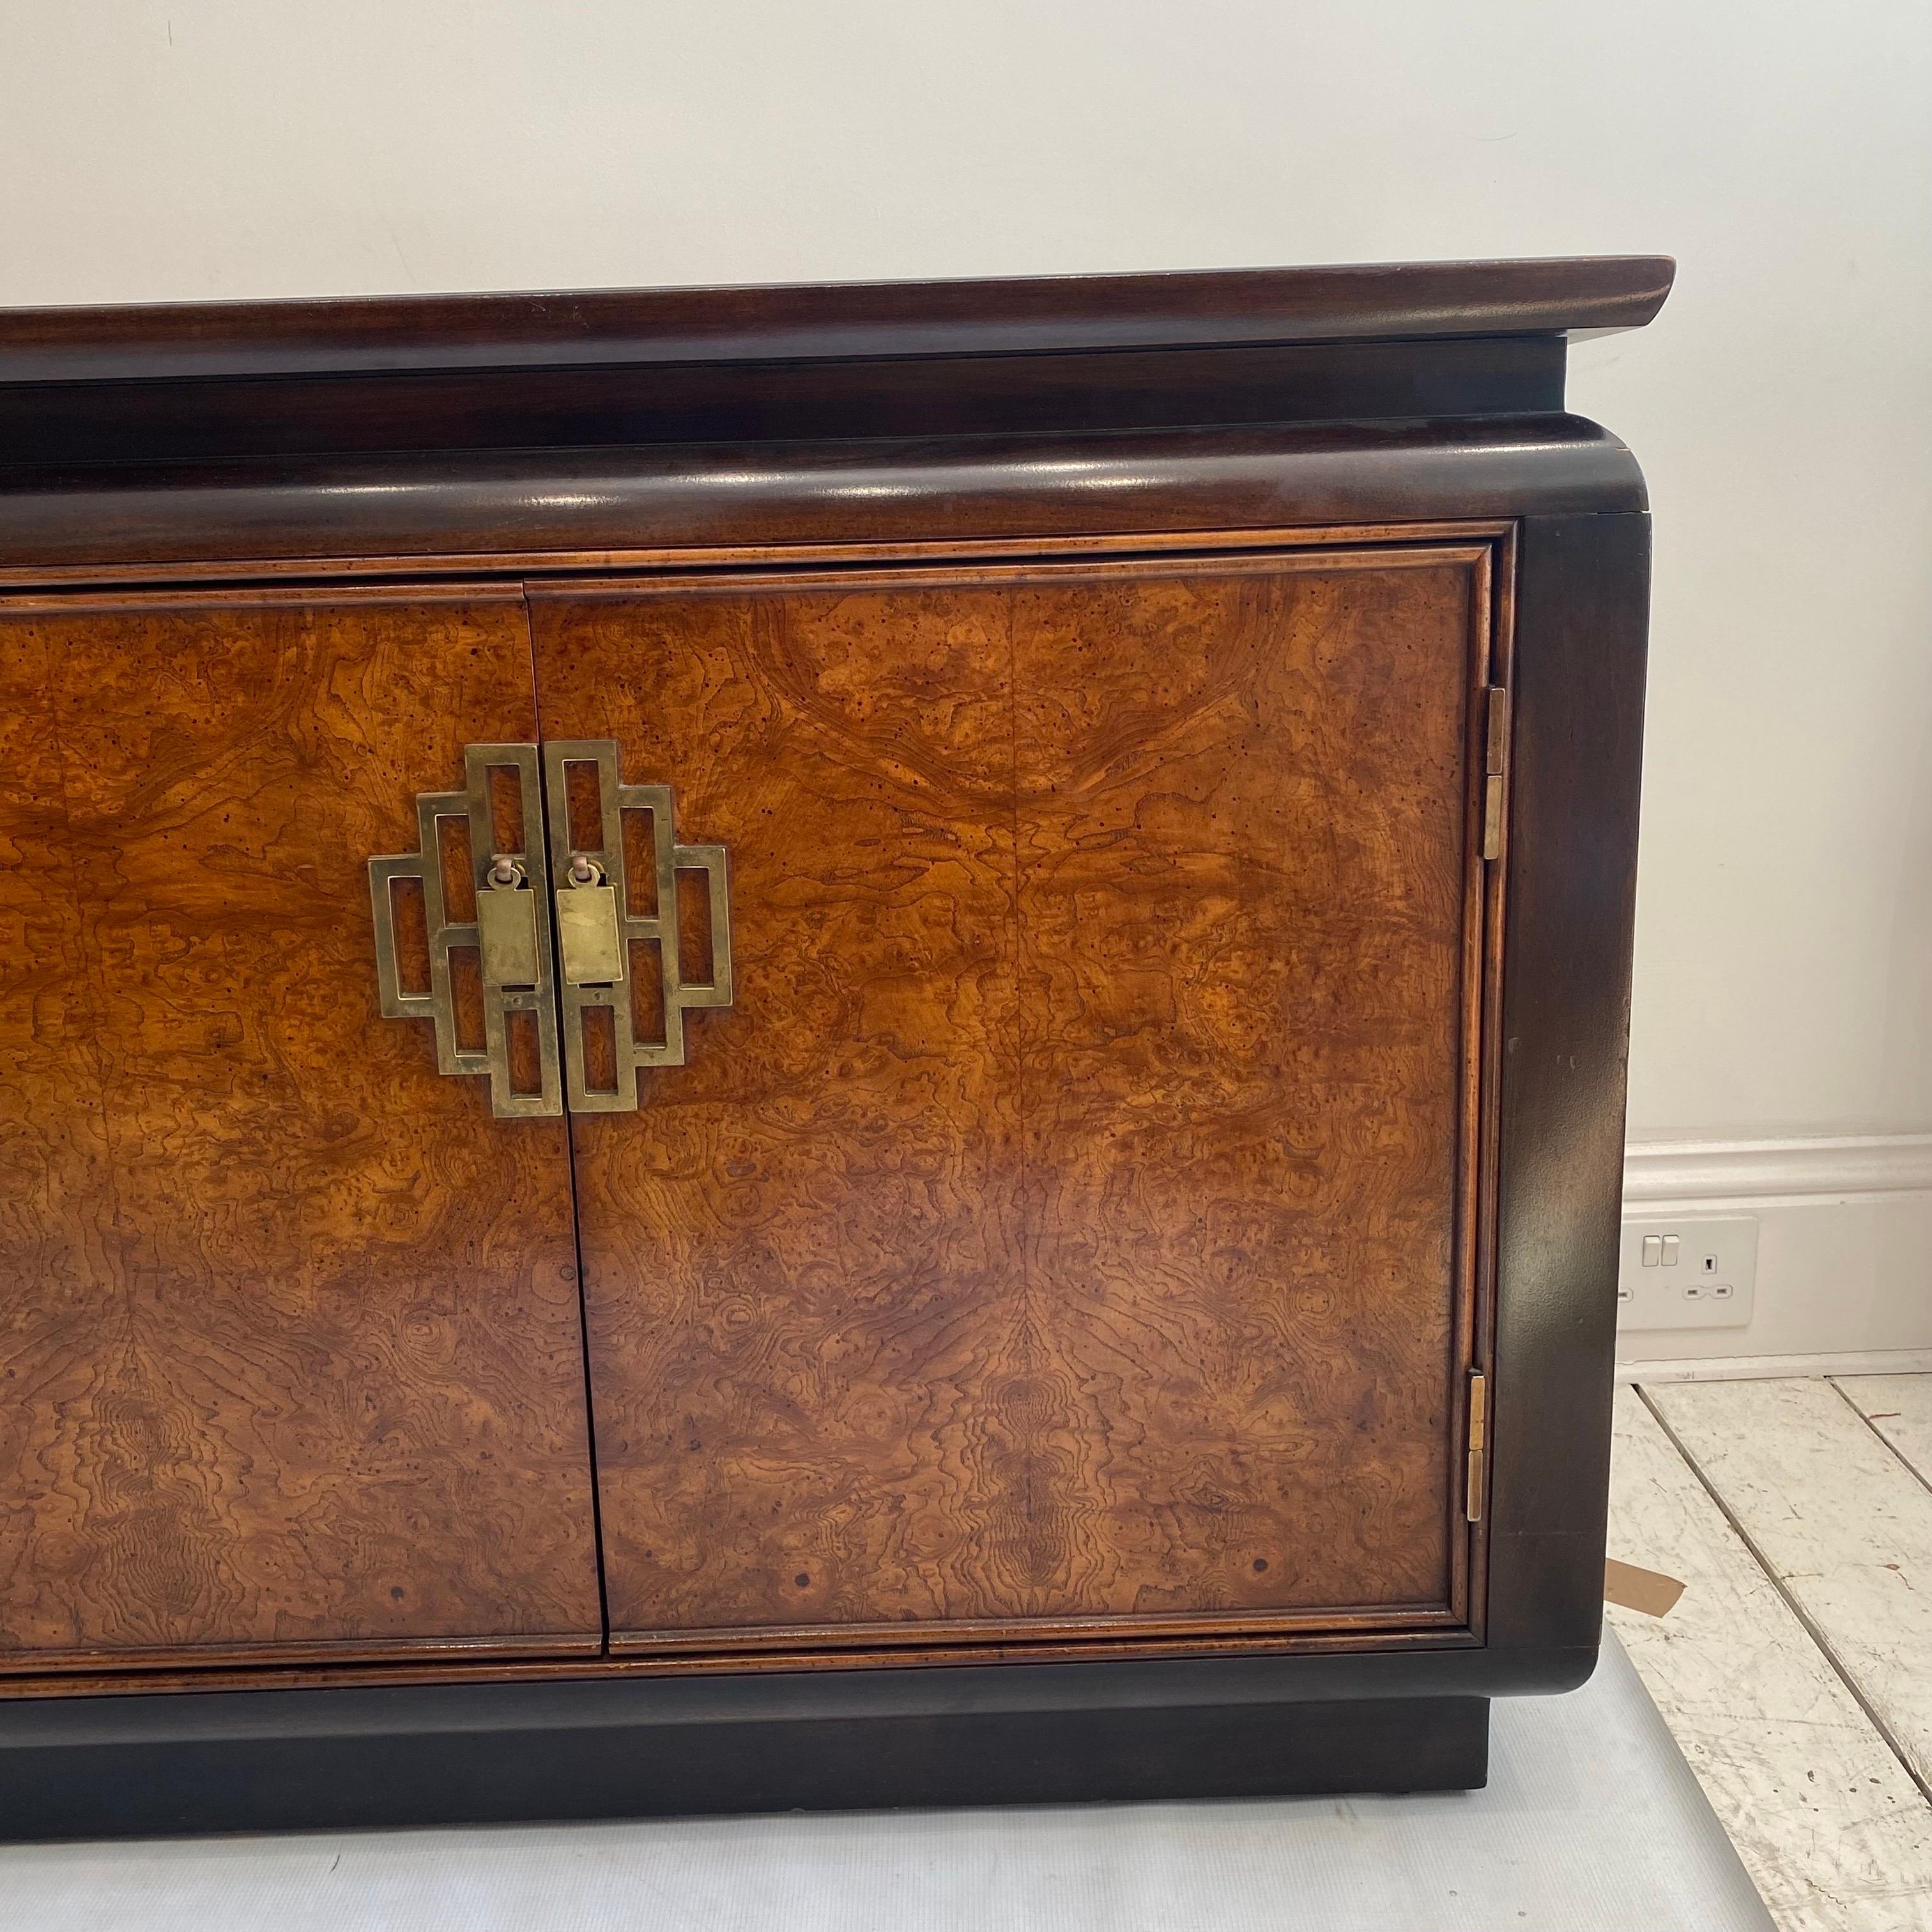 1970s Burl Wood Brass Sideboard 1980s Chinoiserie Vintage Drawers Raymond Sabota In Good Condition For Sale In London, GB